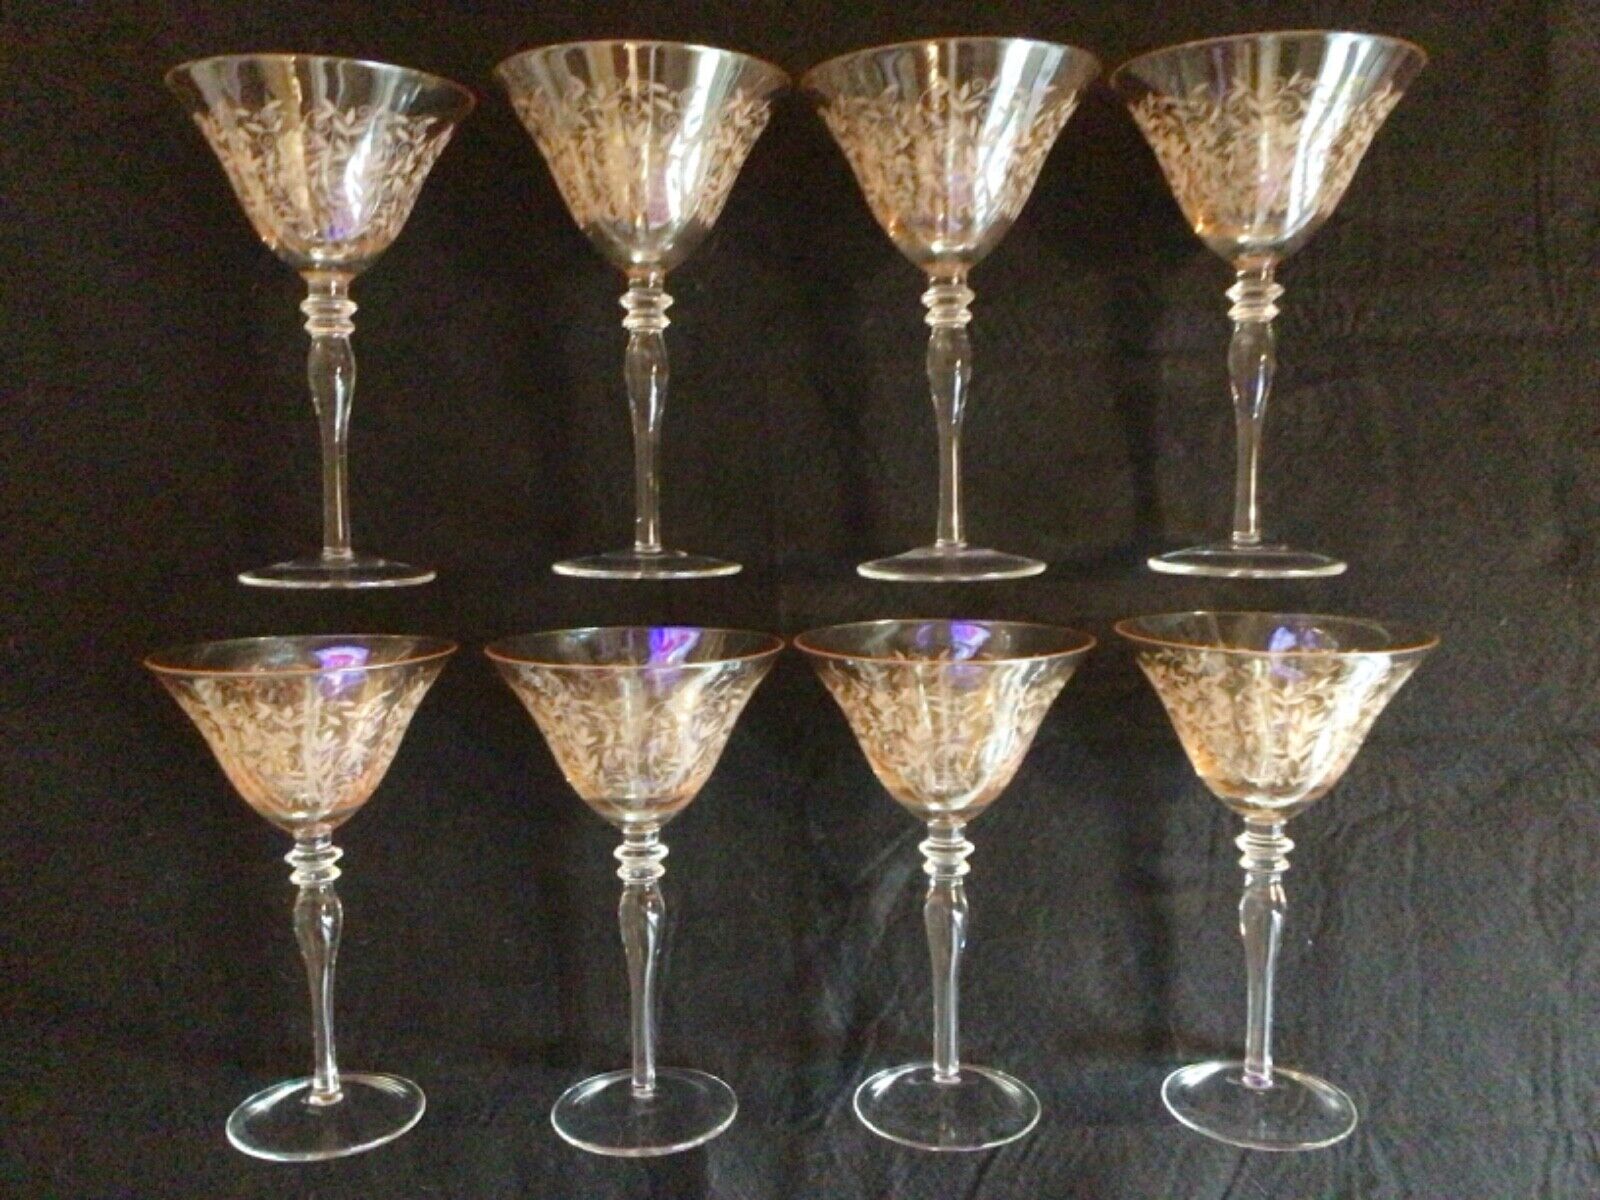 8 Remembrance Rose Luster Champagne Glasses by Home Essentials 8 1/8 x 4 7/8